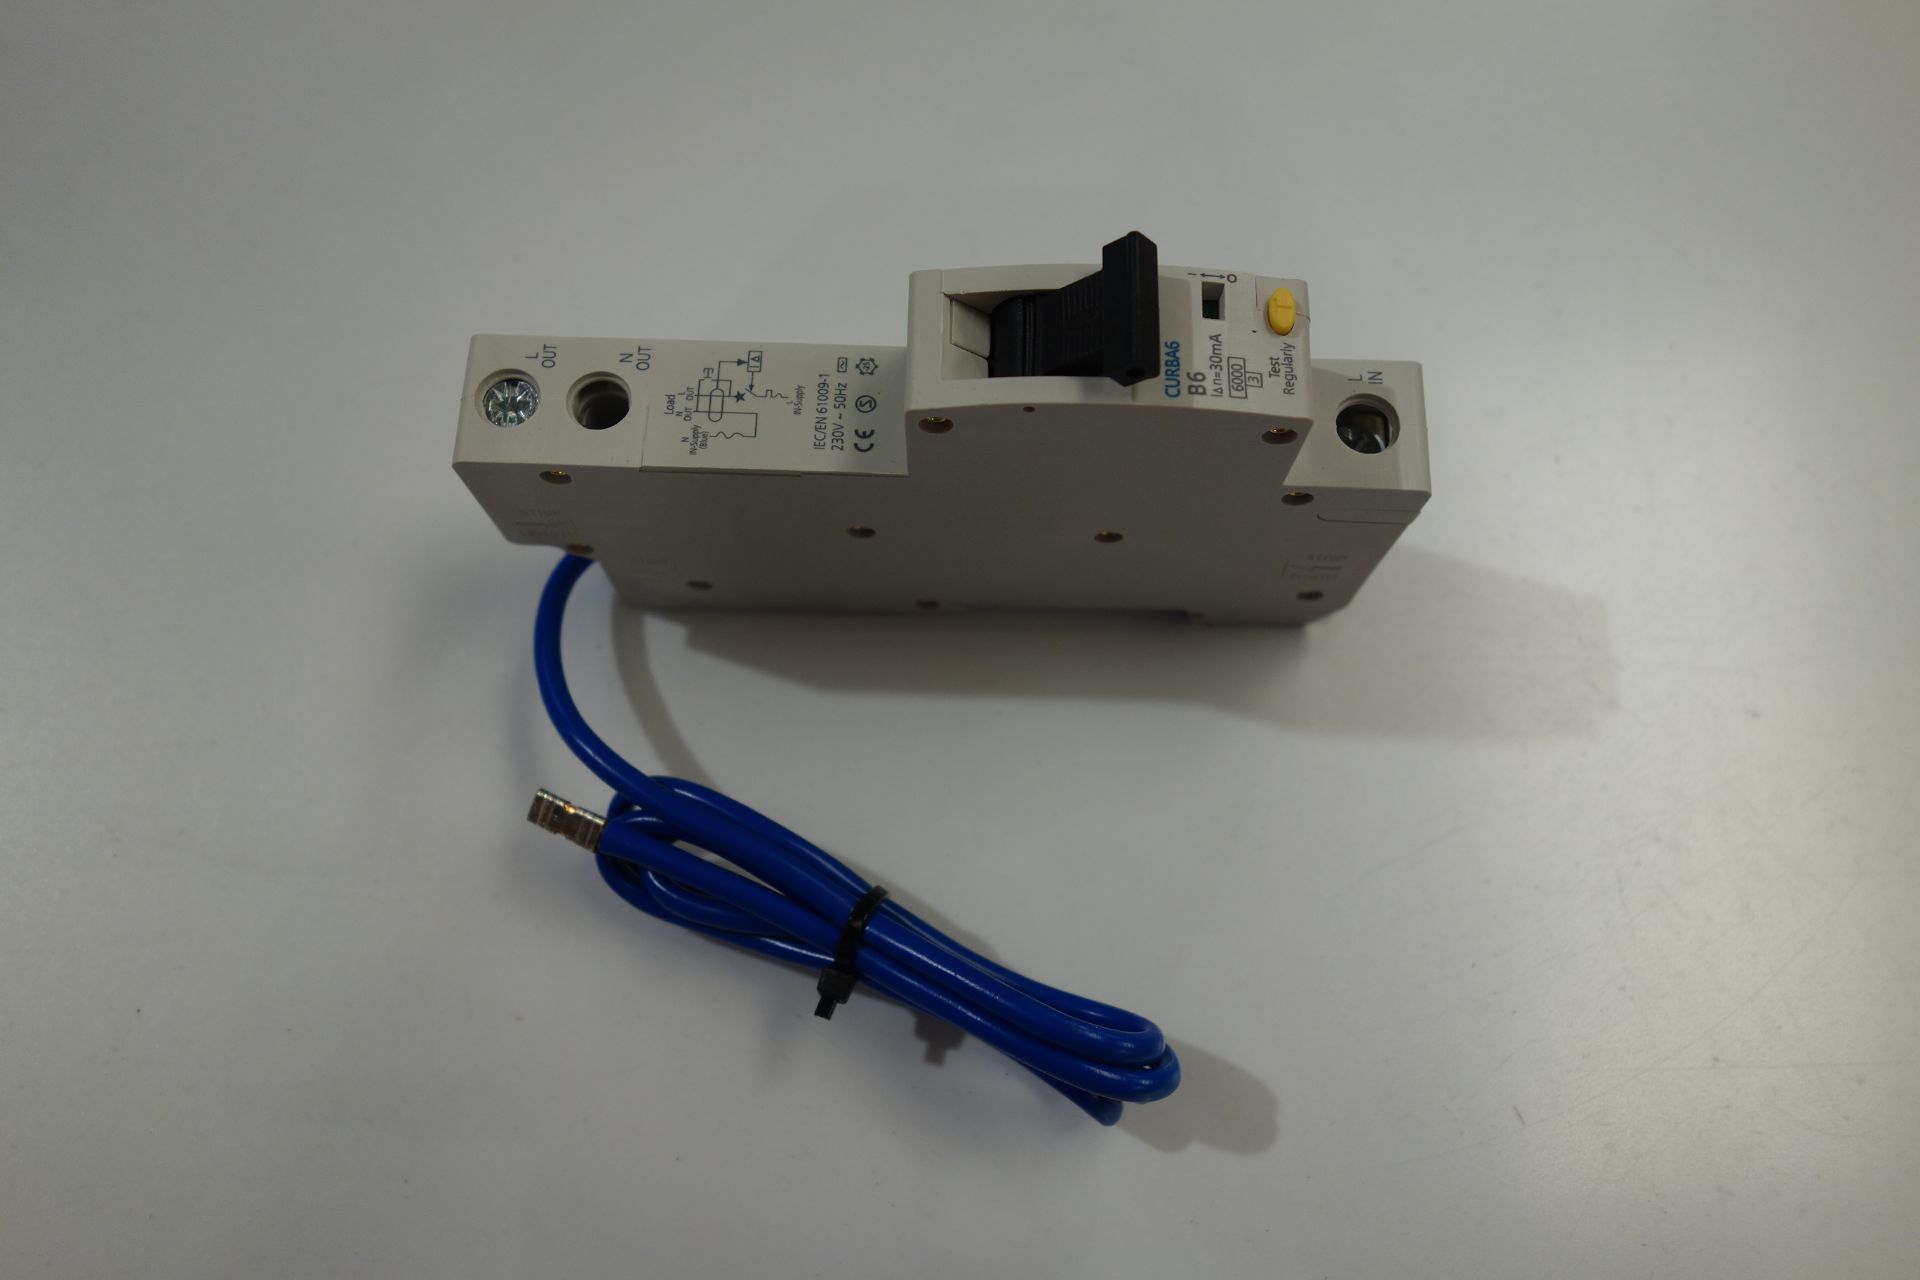 20 X British General CURBA6-01 6A Type B Single Pole RCBO With Out Earth Lead